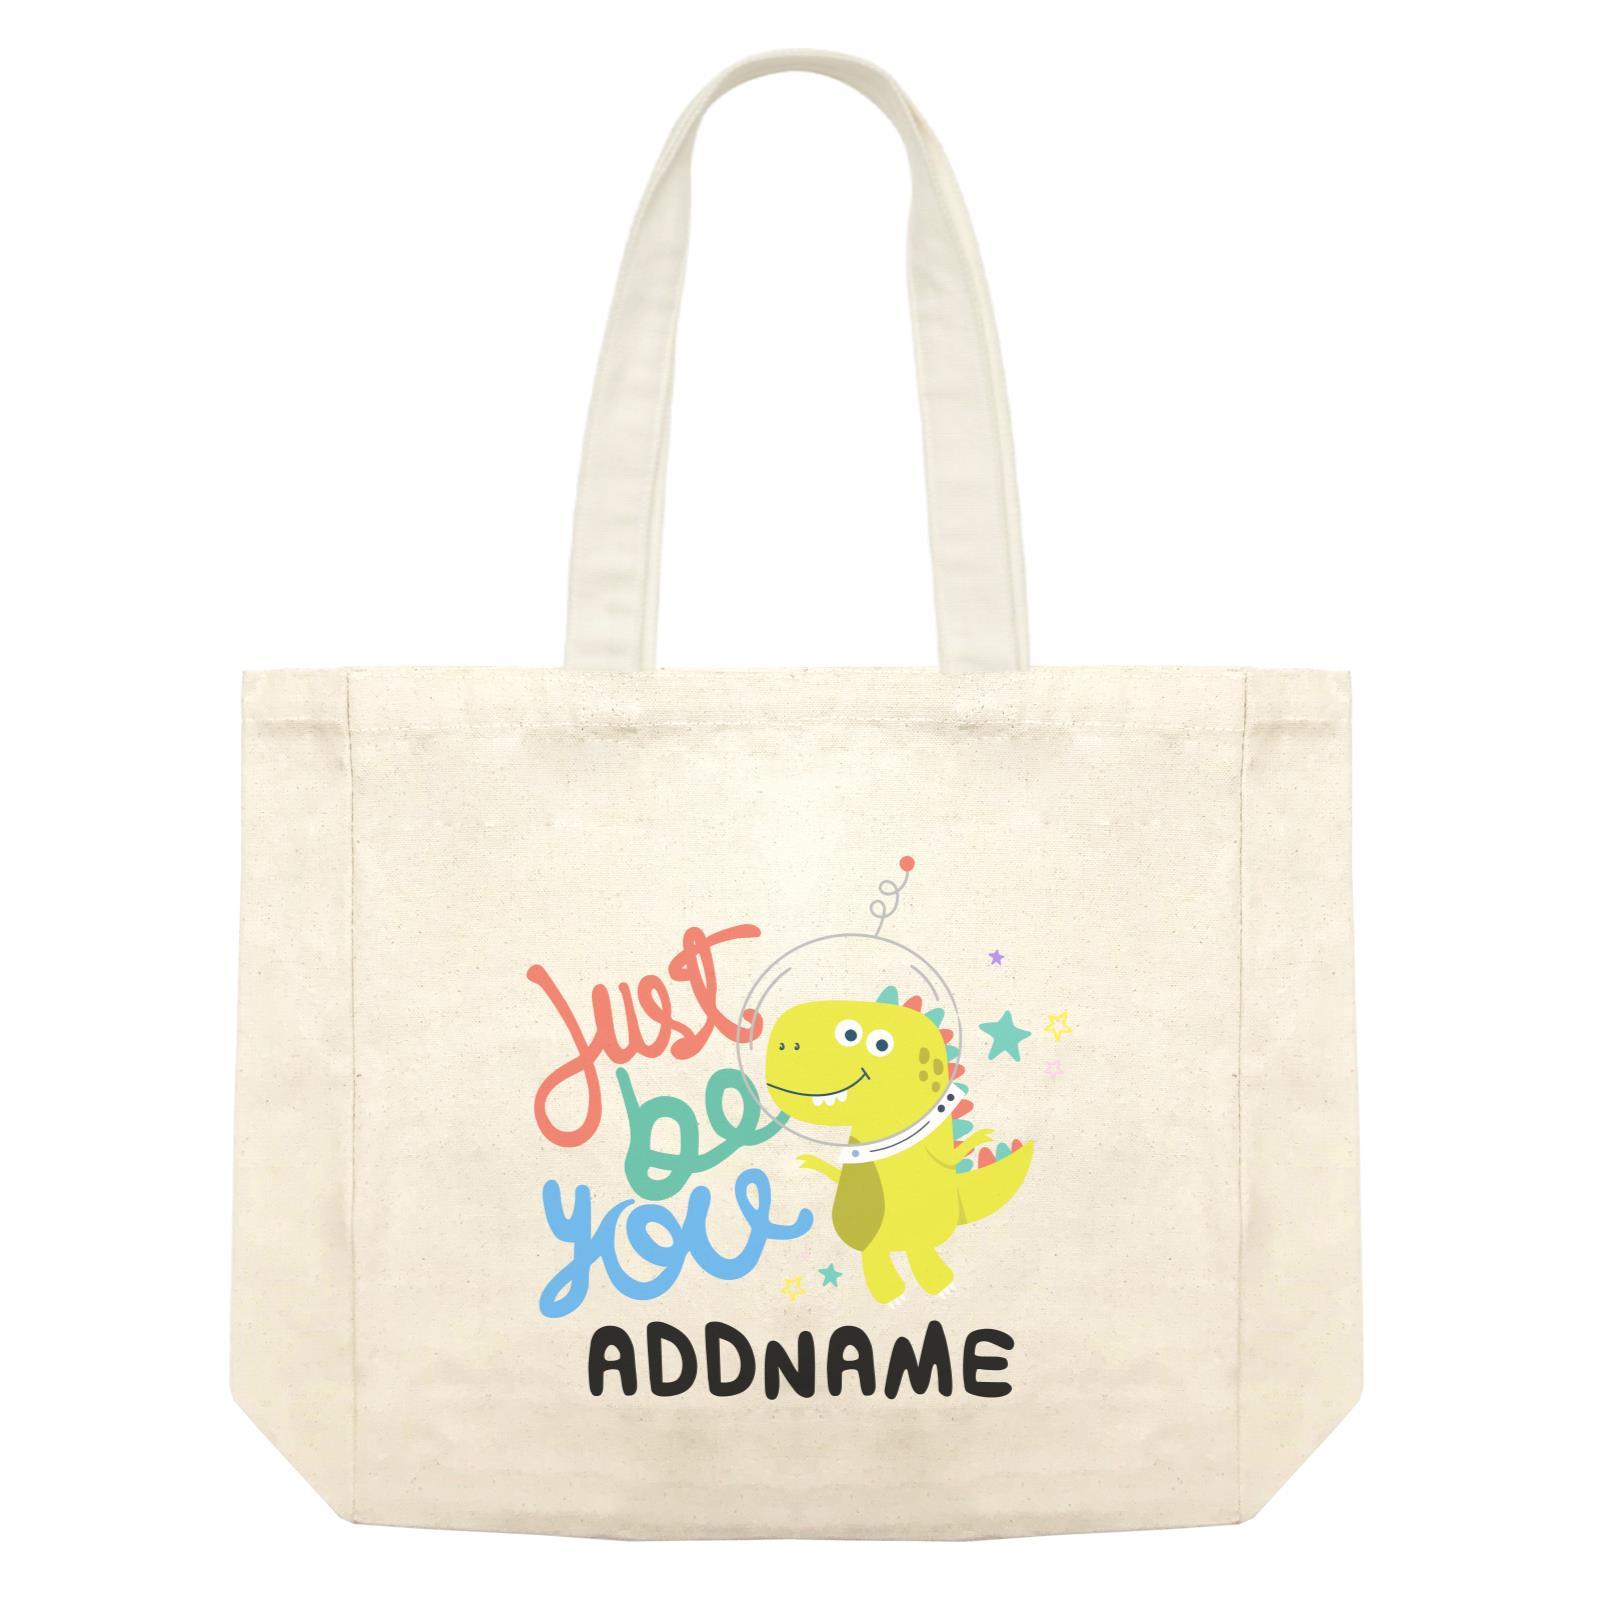 Children's Day Gift Series Just Be You Space Dinosaur Addname Shopping Bag